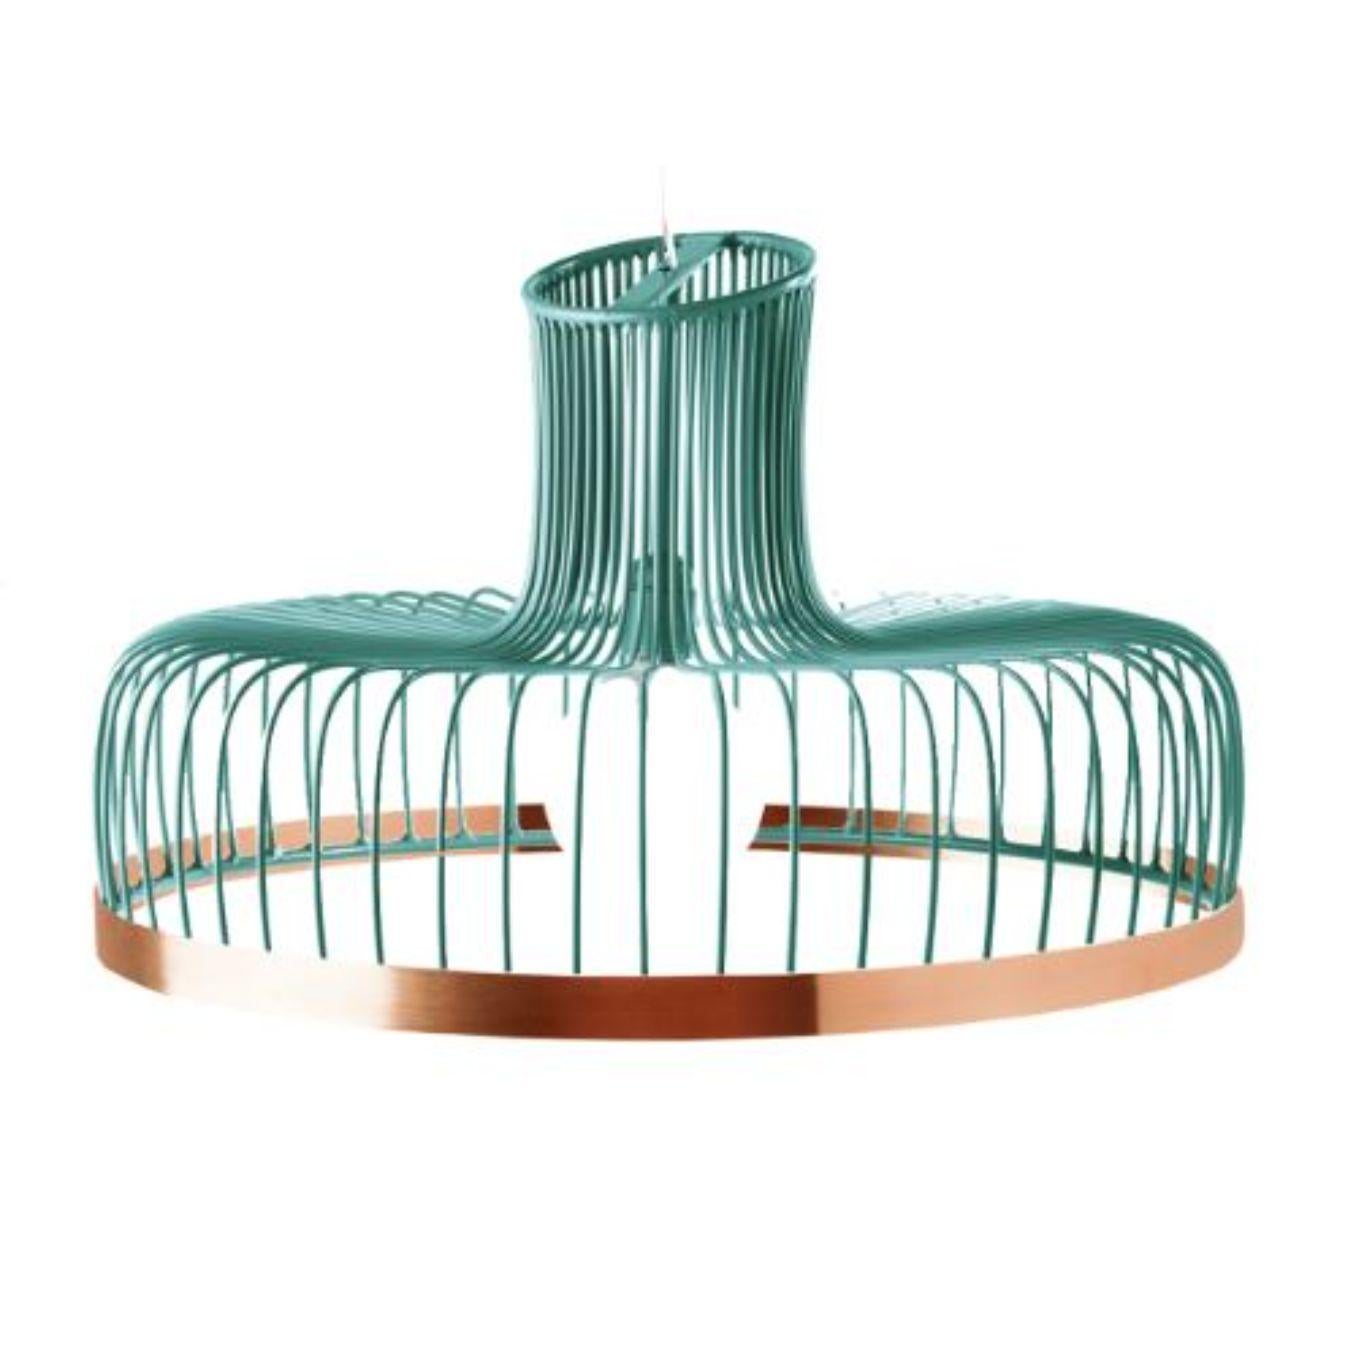 Salmon New Spider Suspension Lamp with Copper Ring by Dooq For Sale 3